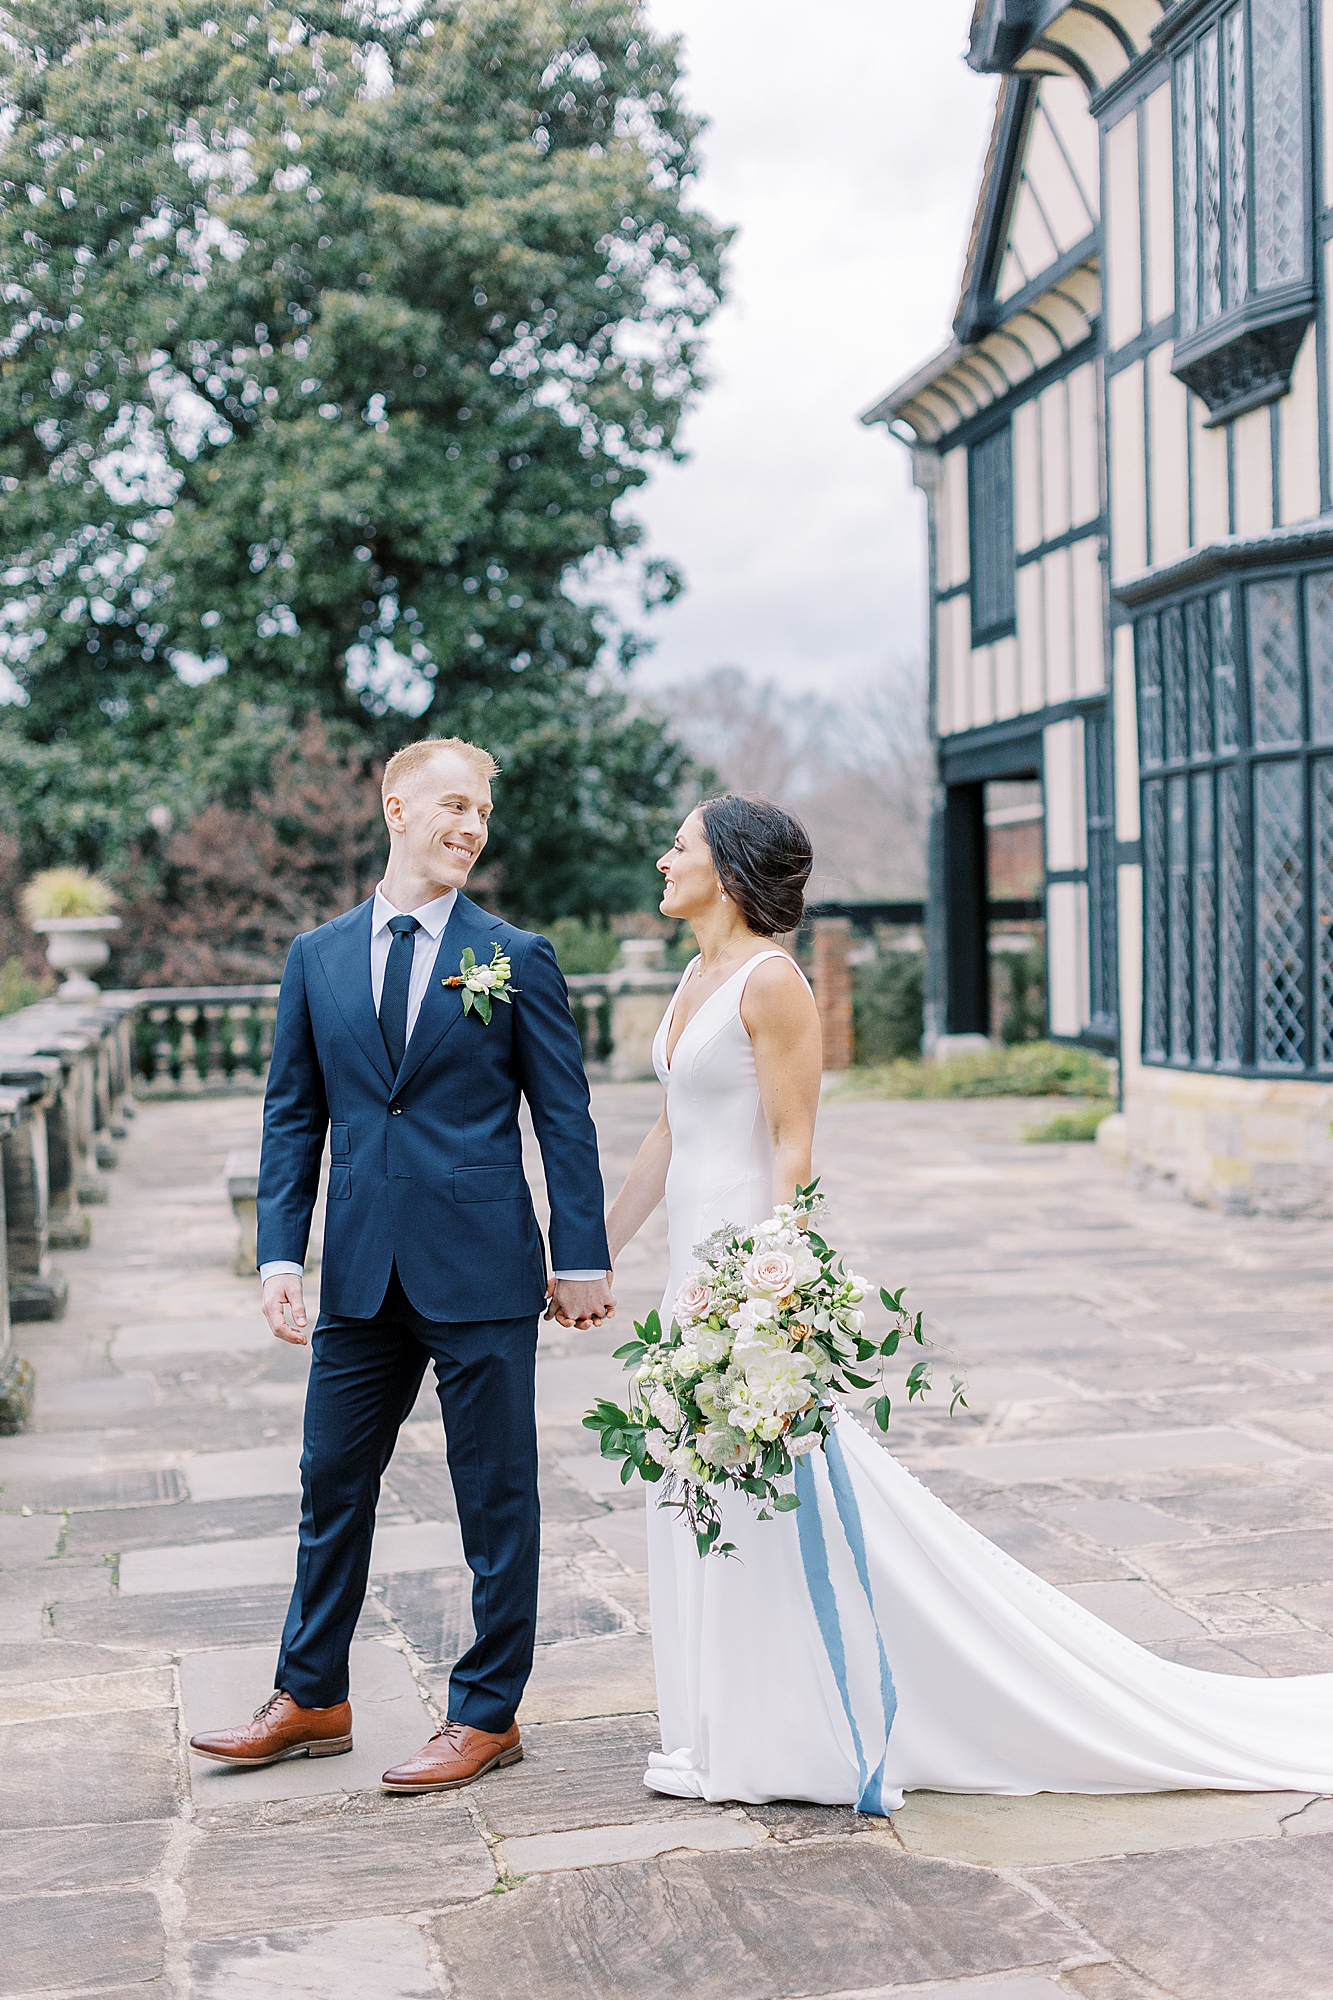 Groom leading bride at Agecroft Hall taken by Richmond wedding photographer.